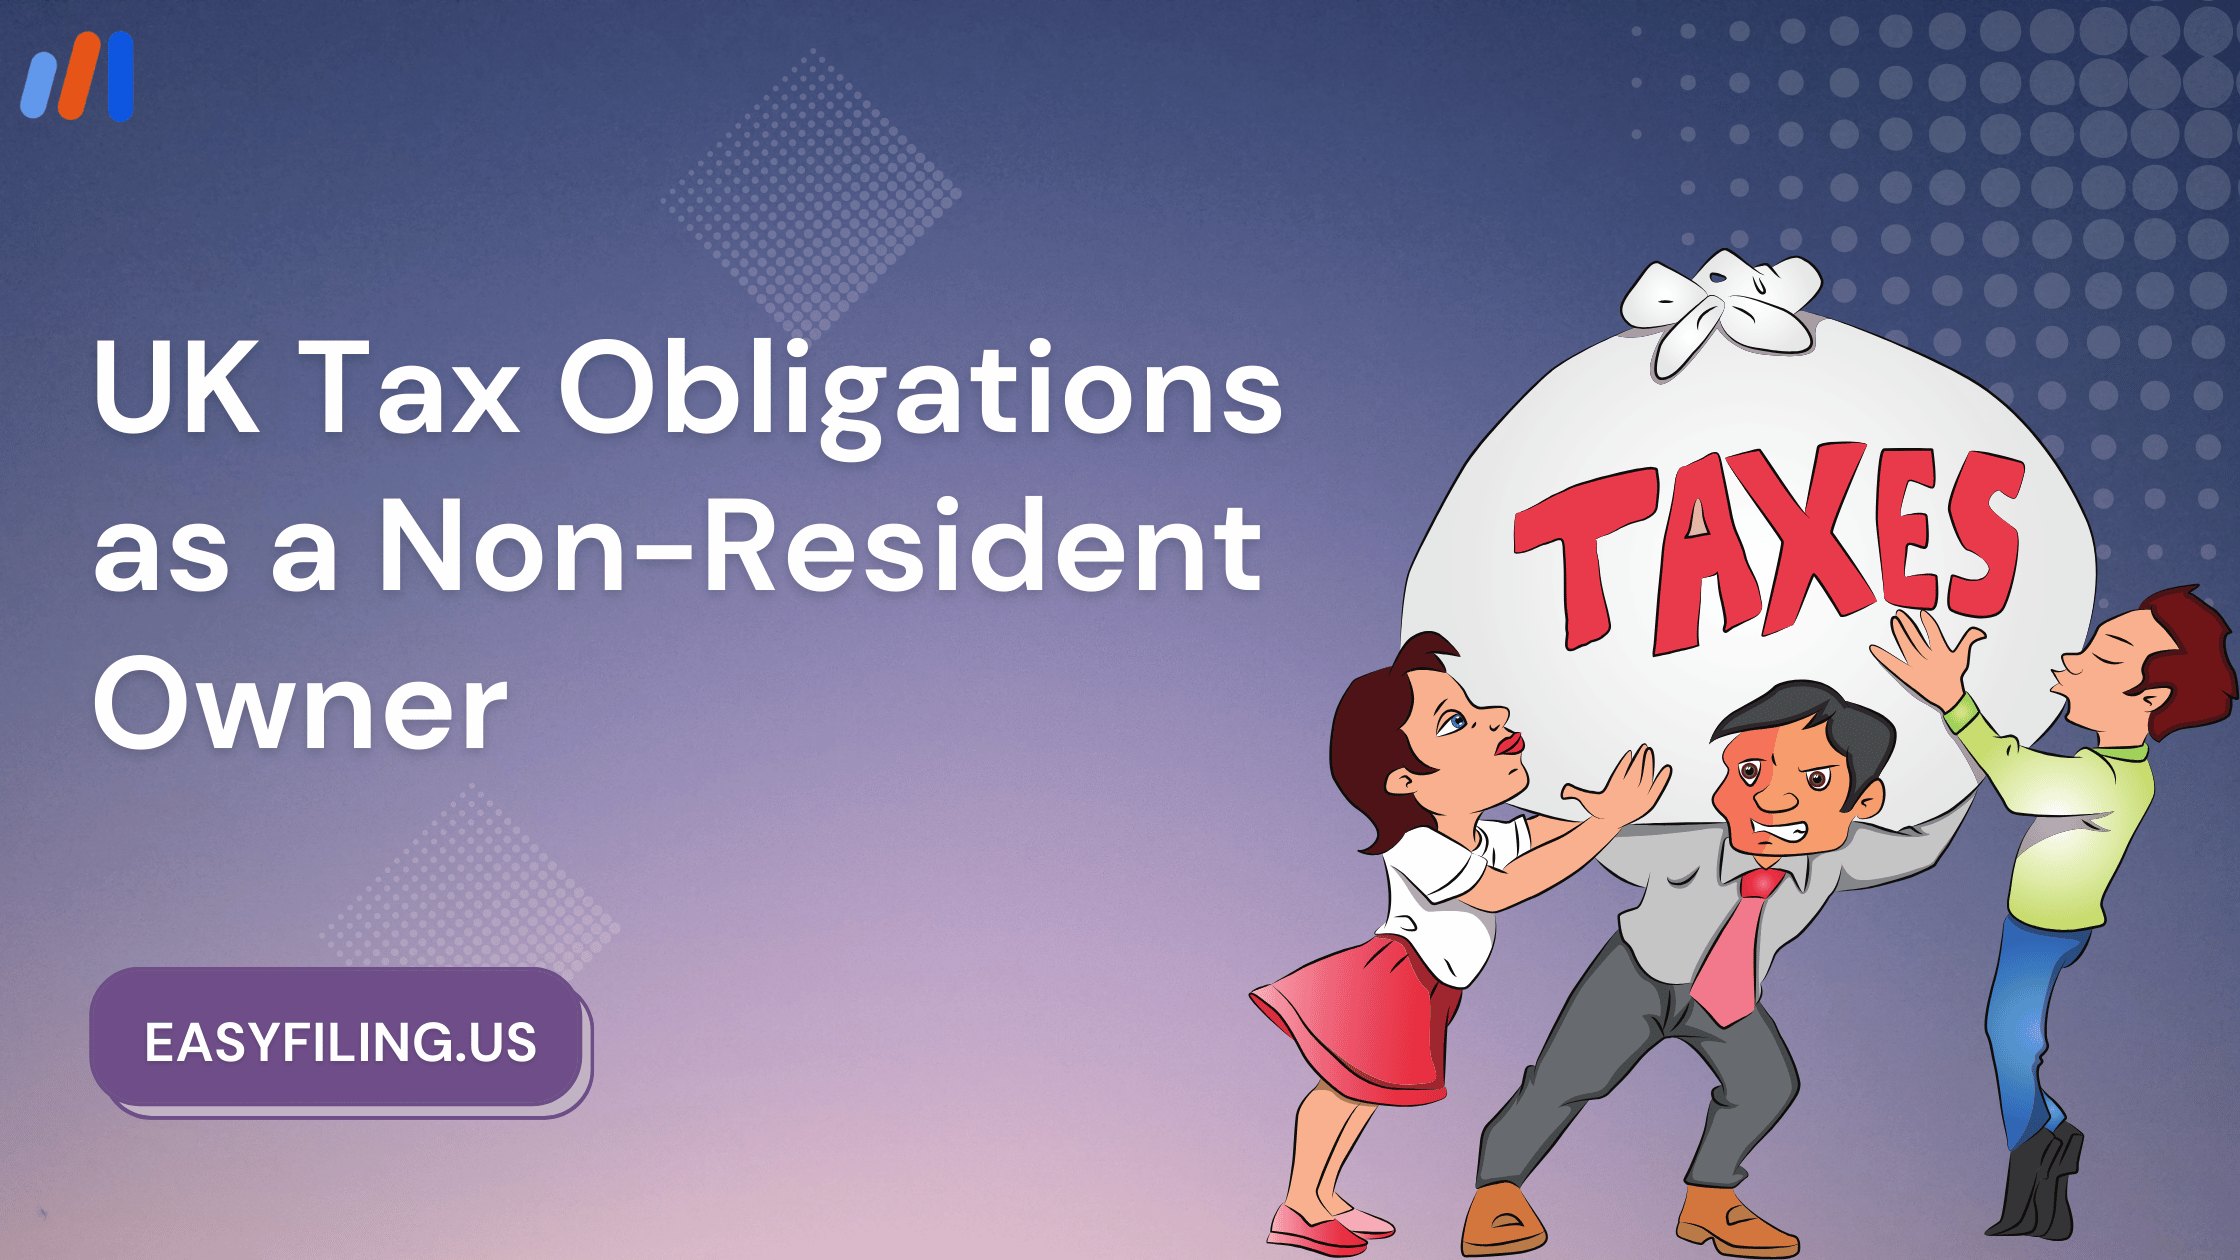 UK Tax Obligations as a Non-Resident Owner